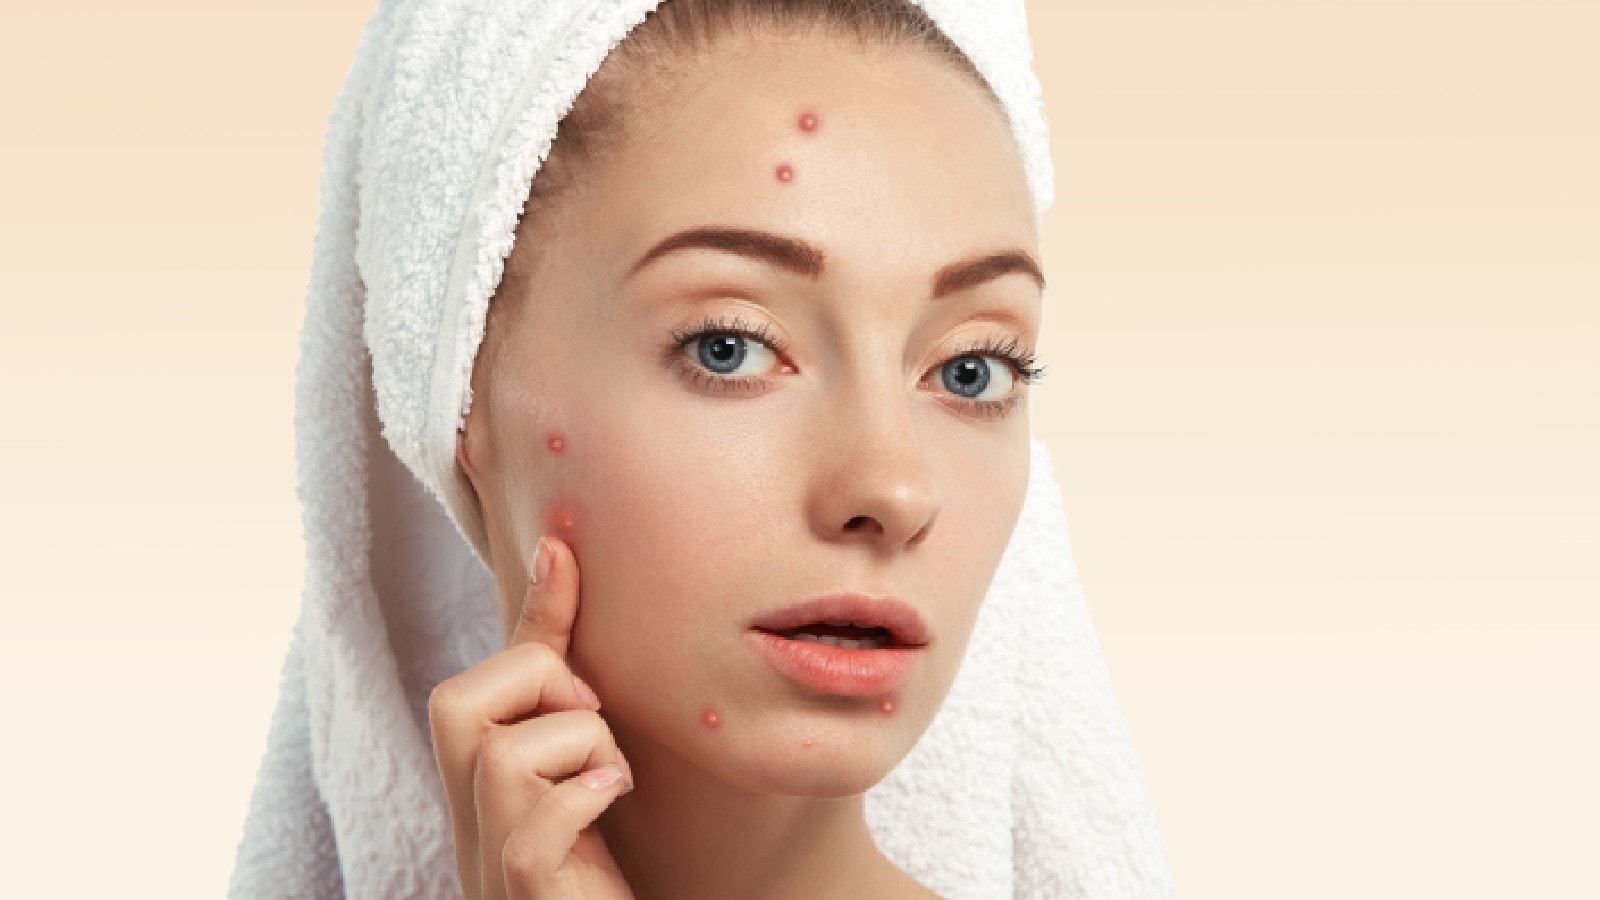 Struggling with acne? Add these 5 acne-fighting heroes to your skincare routine